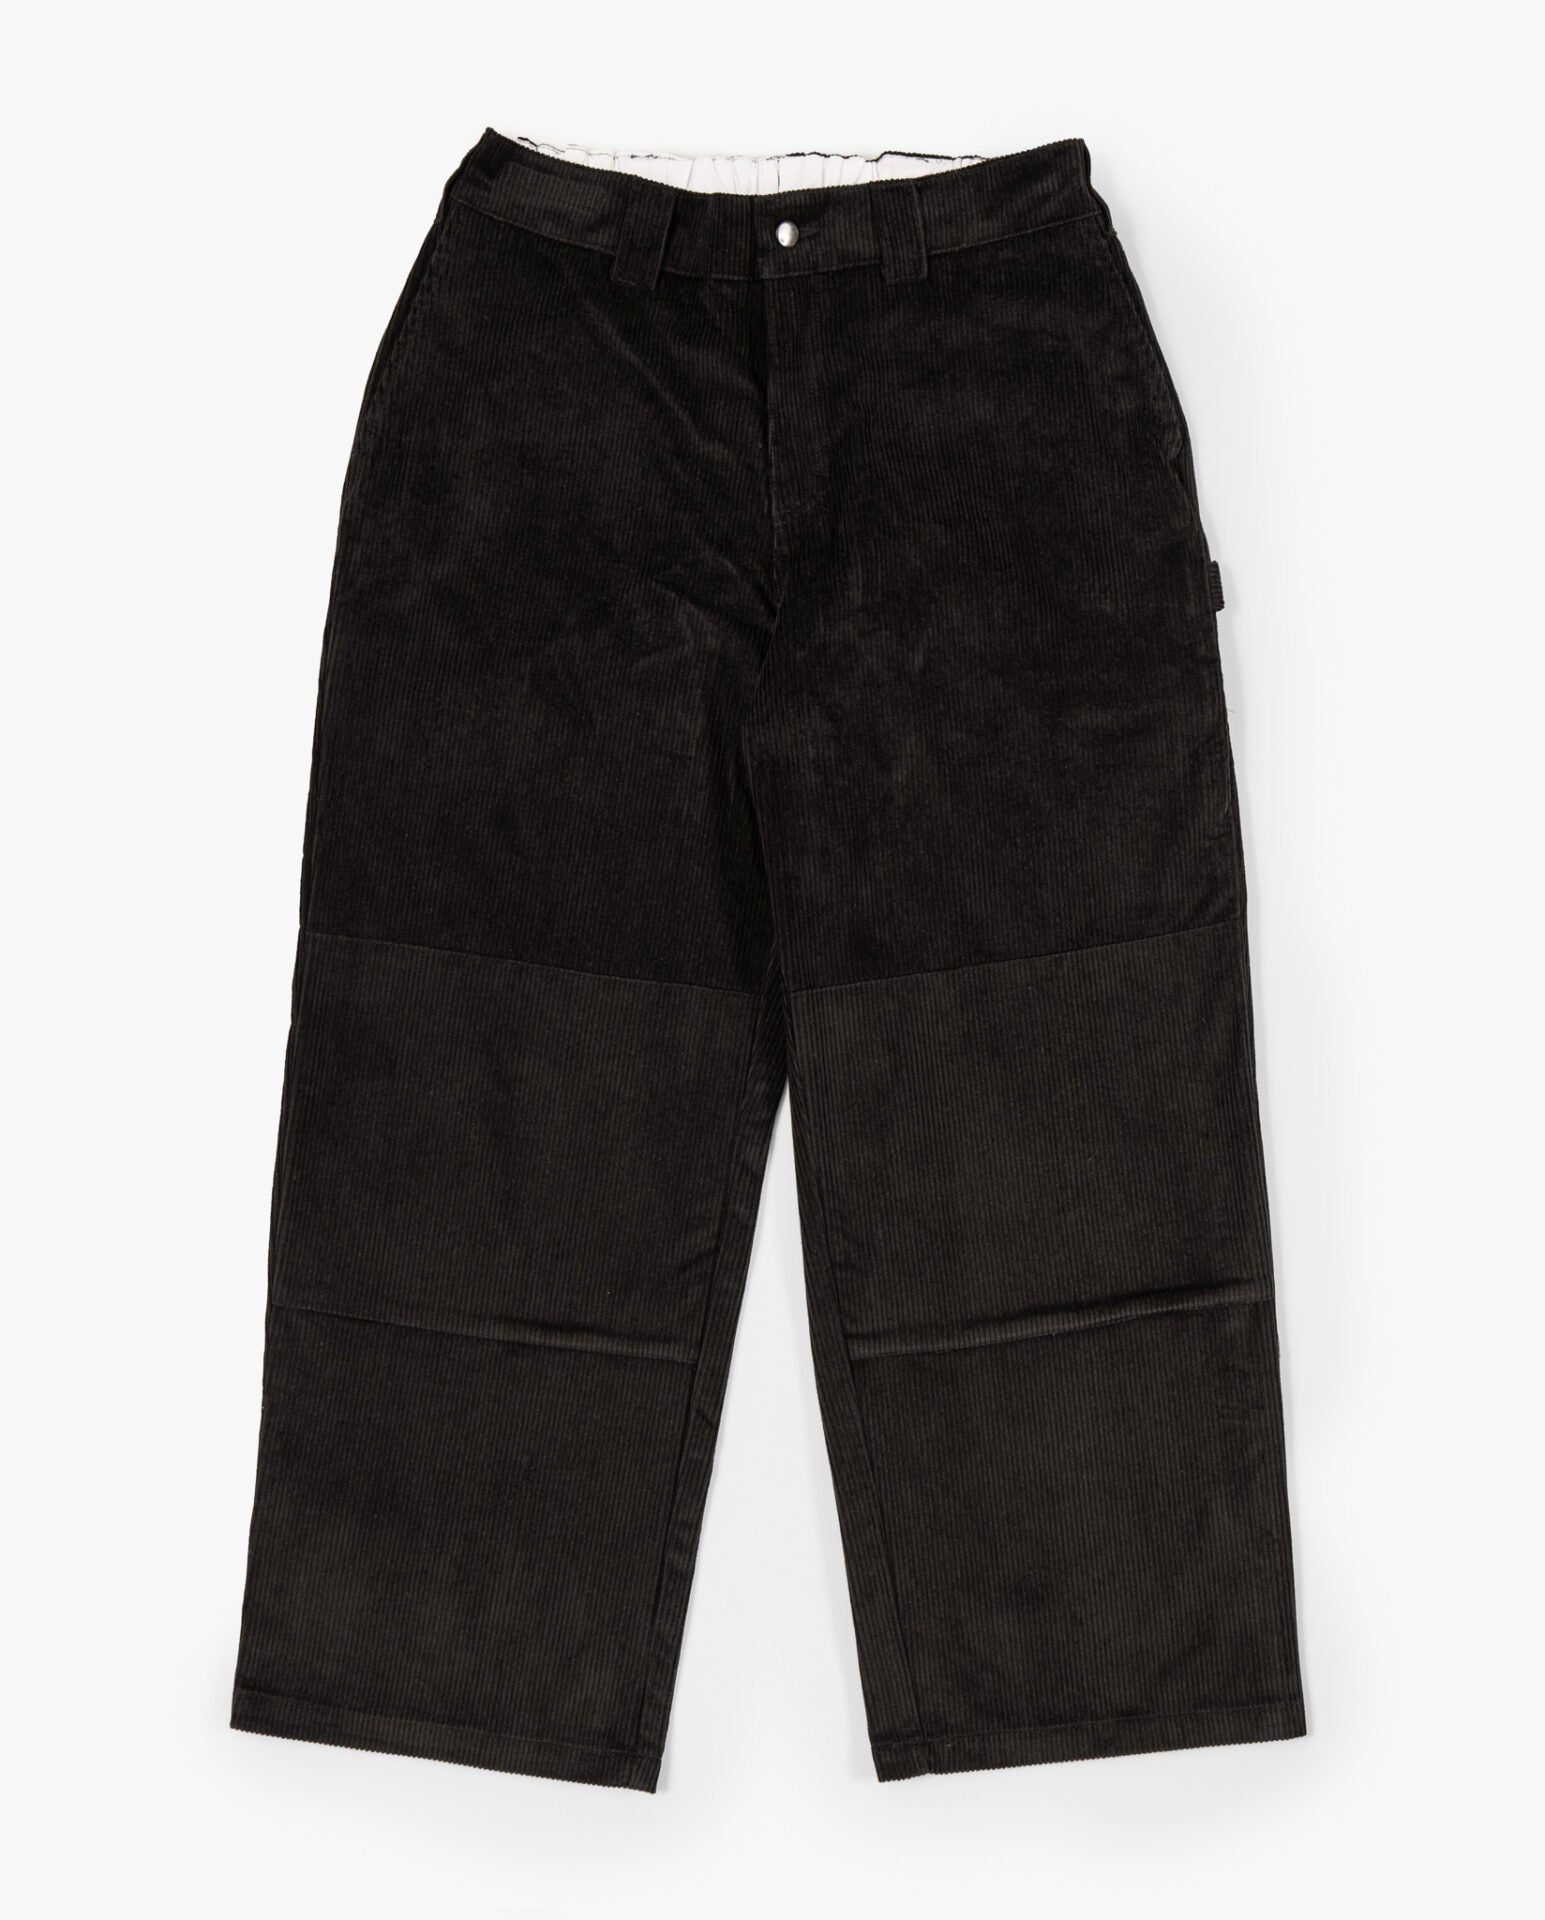 Sculptor pants / Canvas – Olive – POETICCOLLECTIVE